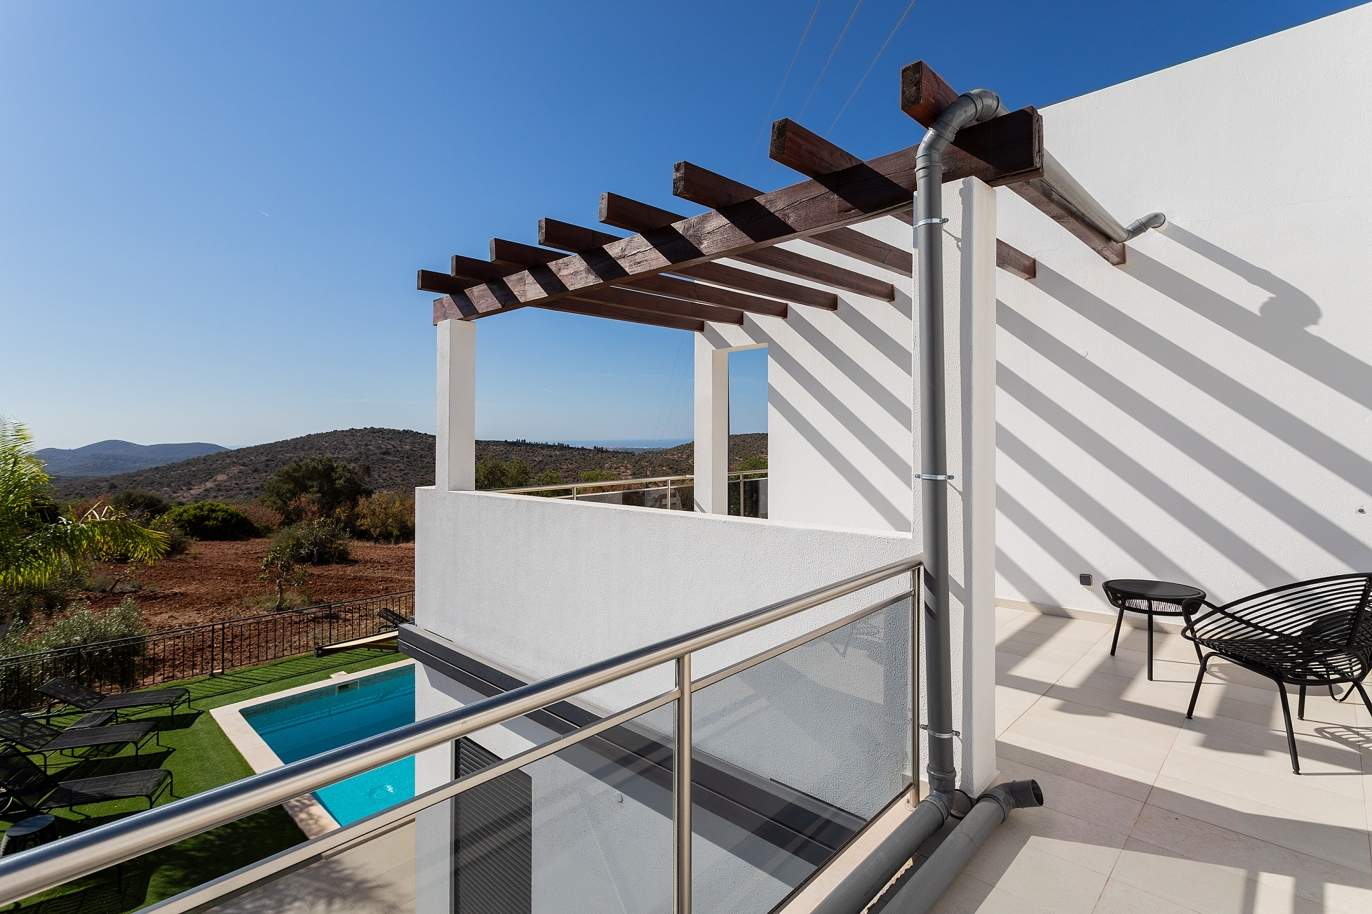 New Villa with 4 bedrooms, sea and mountain view, Loulé, Algarve_179028